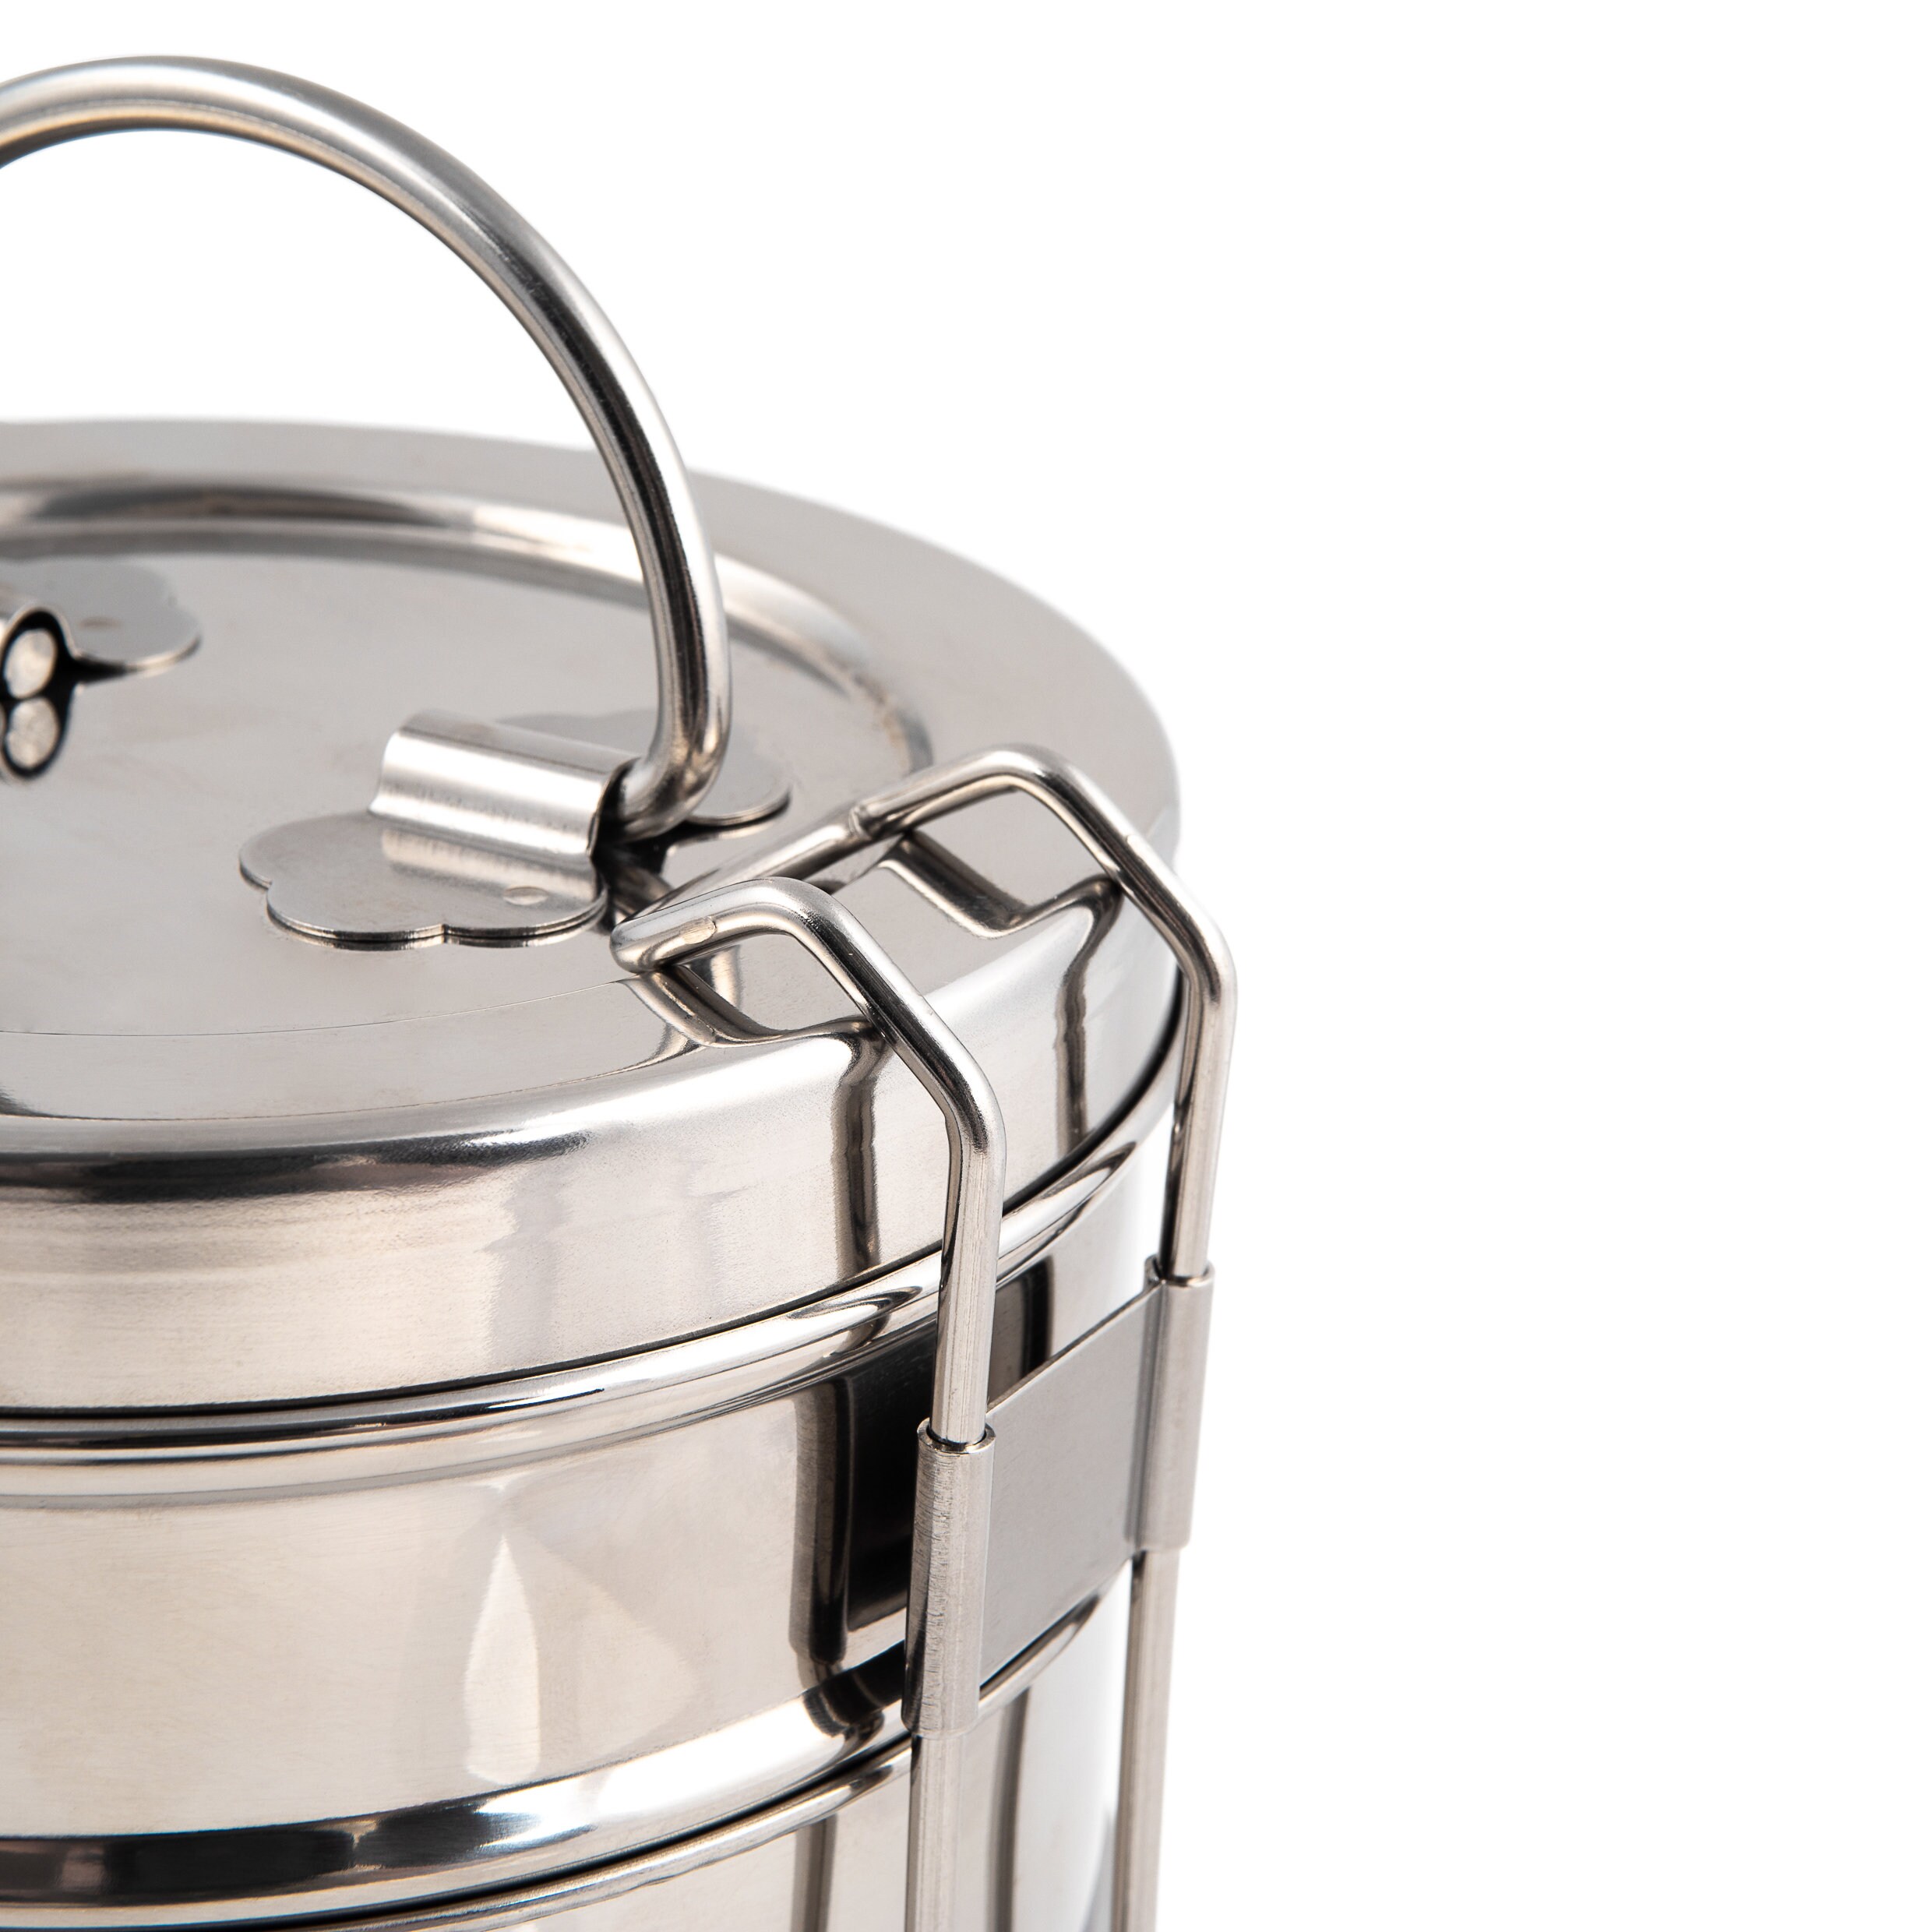  Ibili Stainless Steel Camping Lunch Box Set With 2